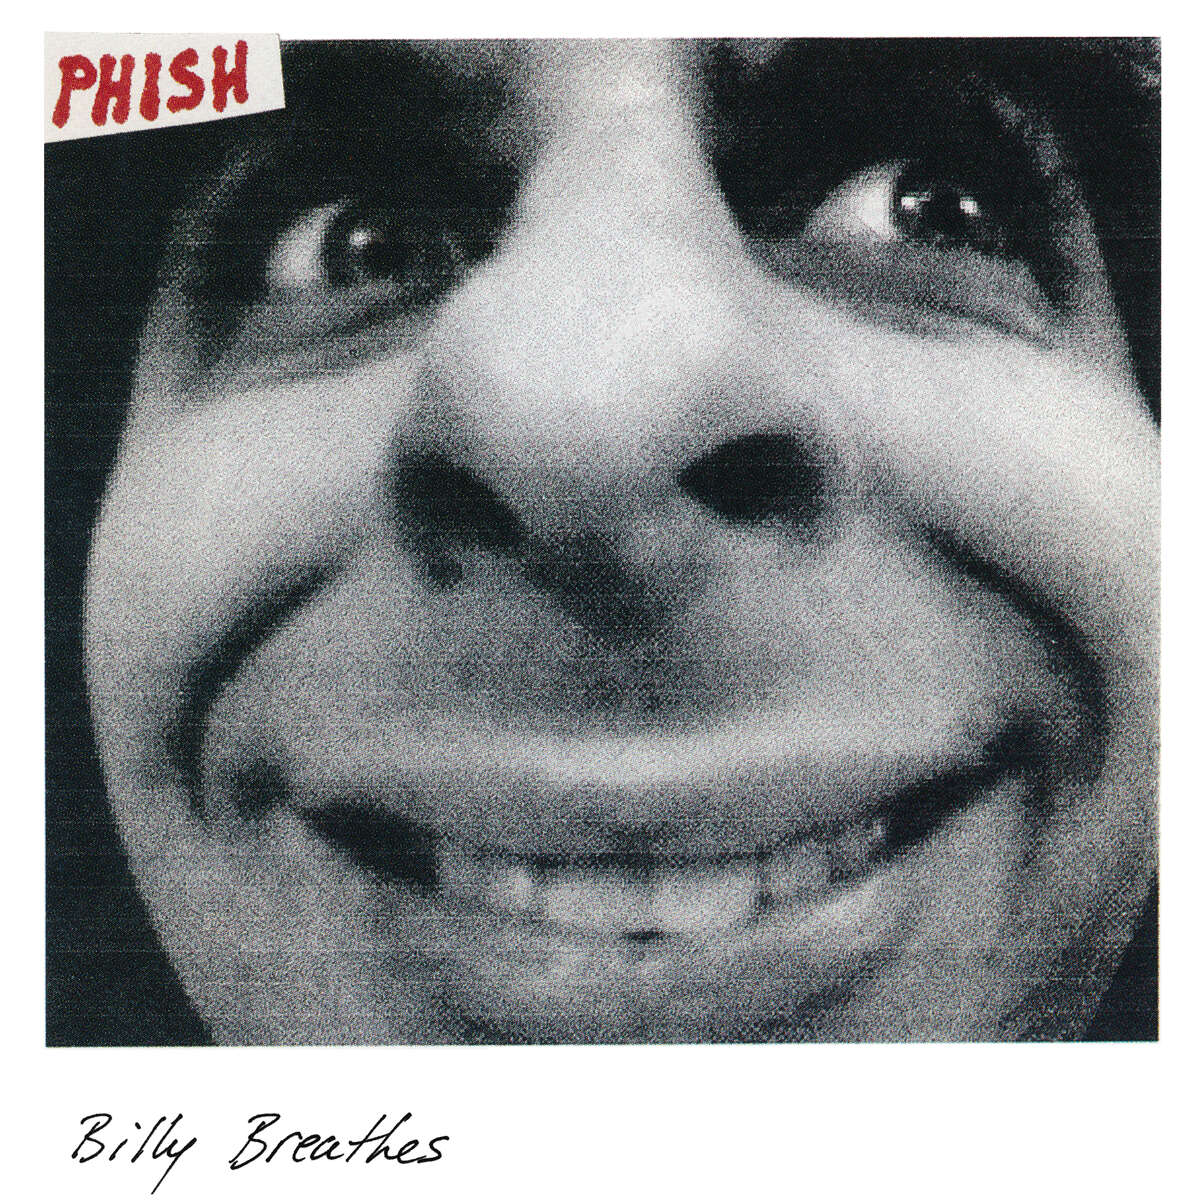 The album “Billy Breathes” by Phish was recorded at Bearsville Studios.